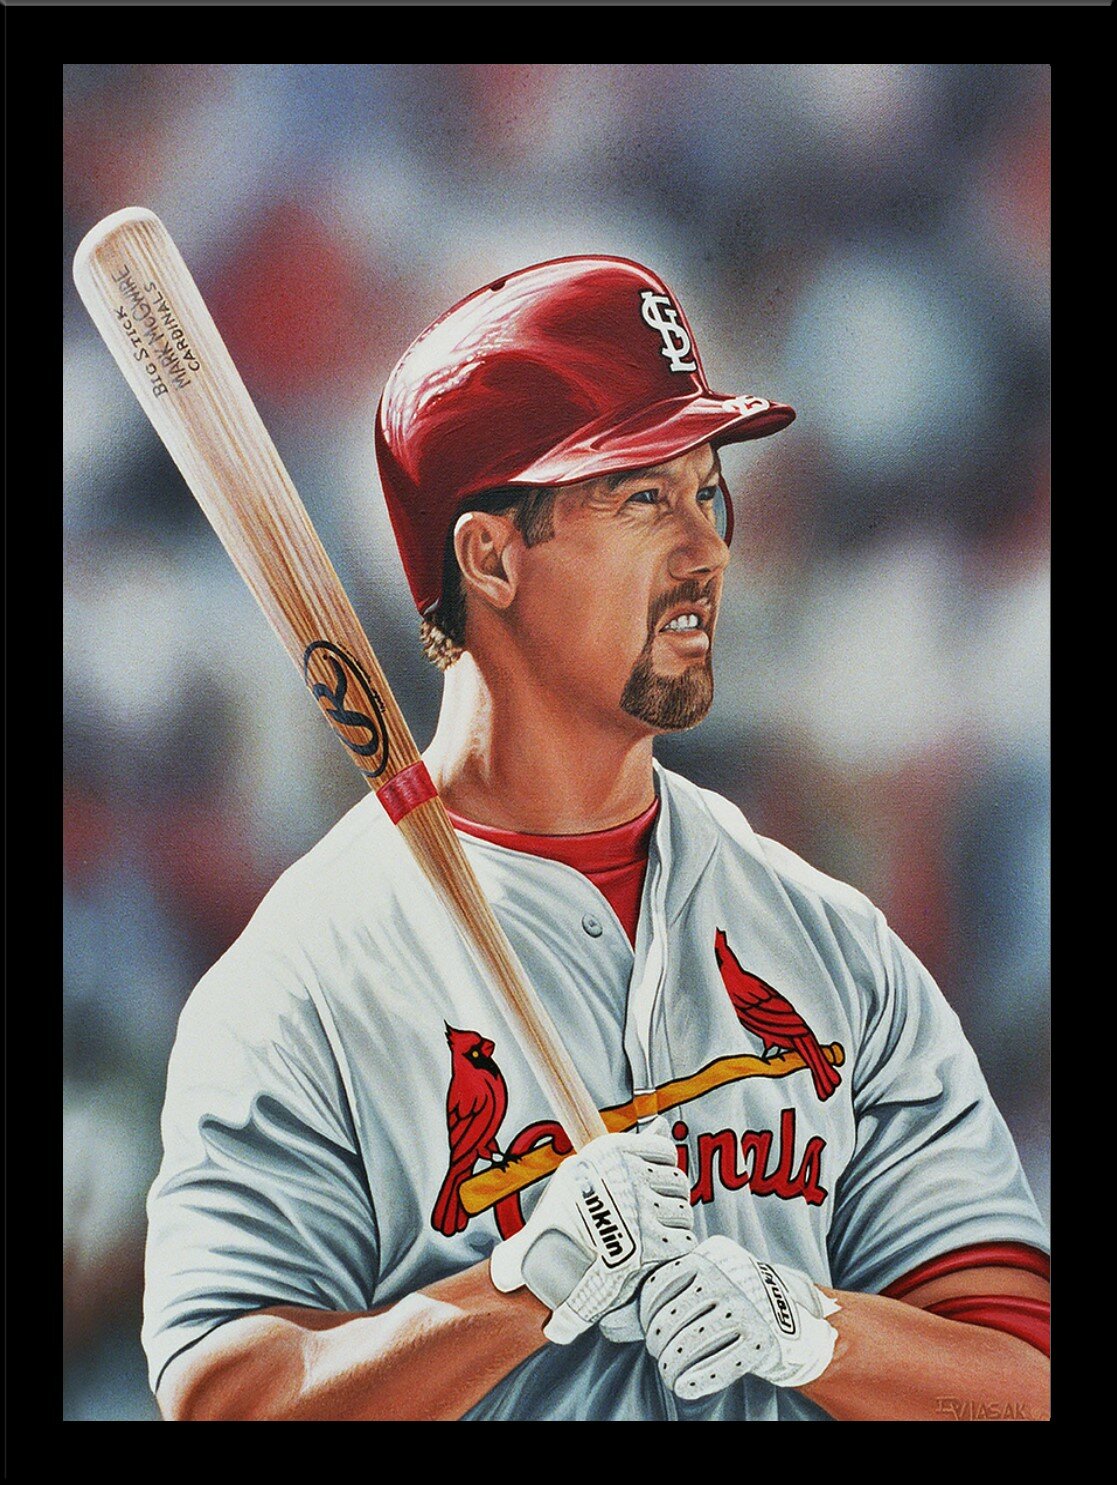 St. Louis Cardinals Mark Mcgwire Sports Illustrated Cover